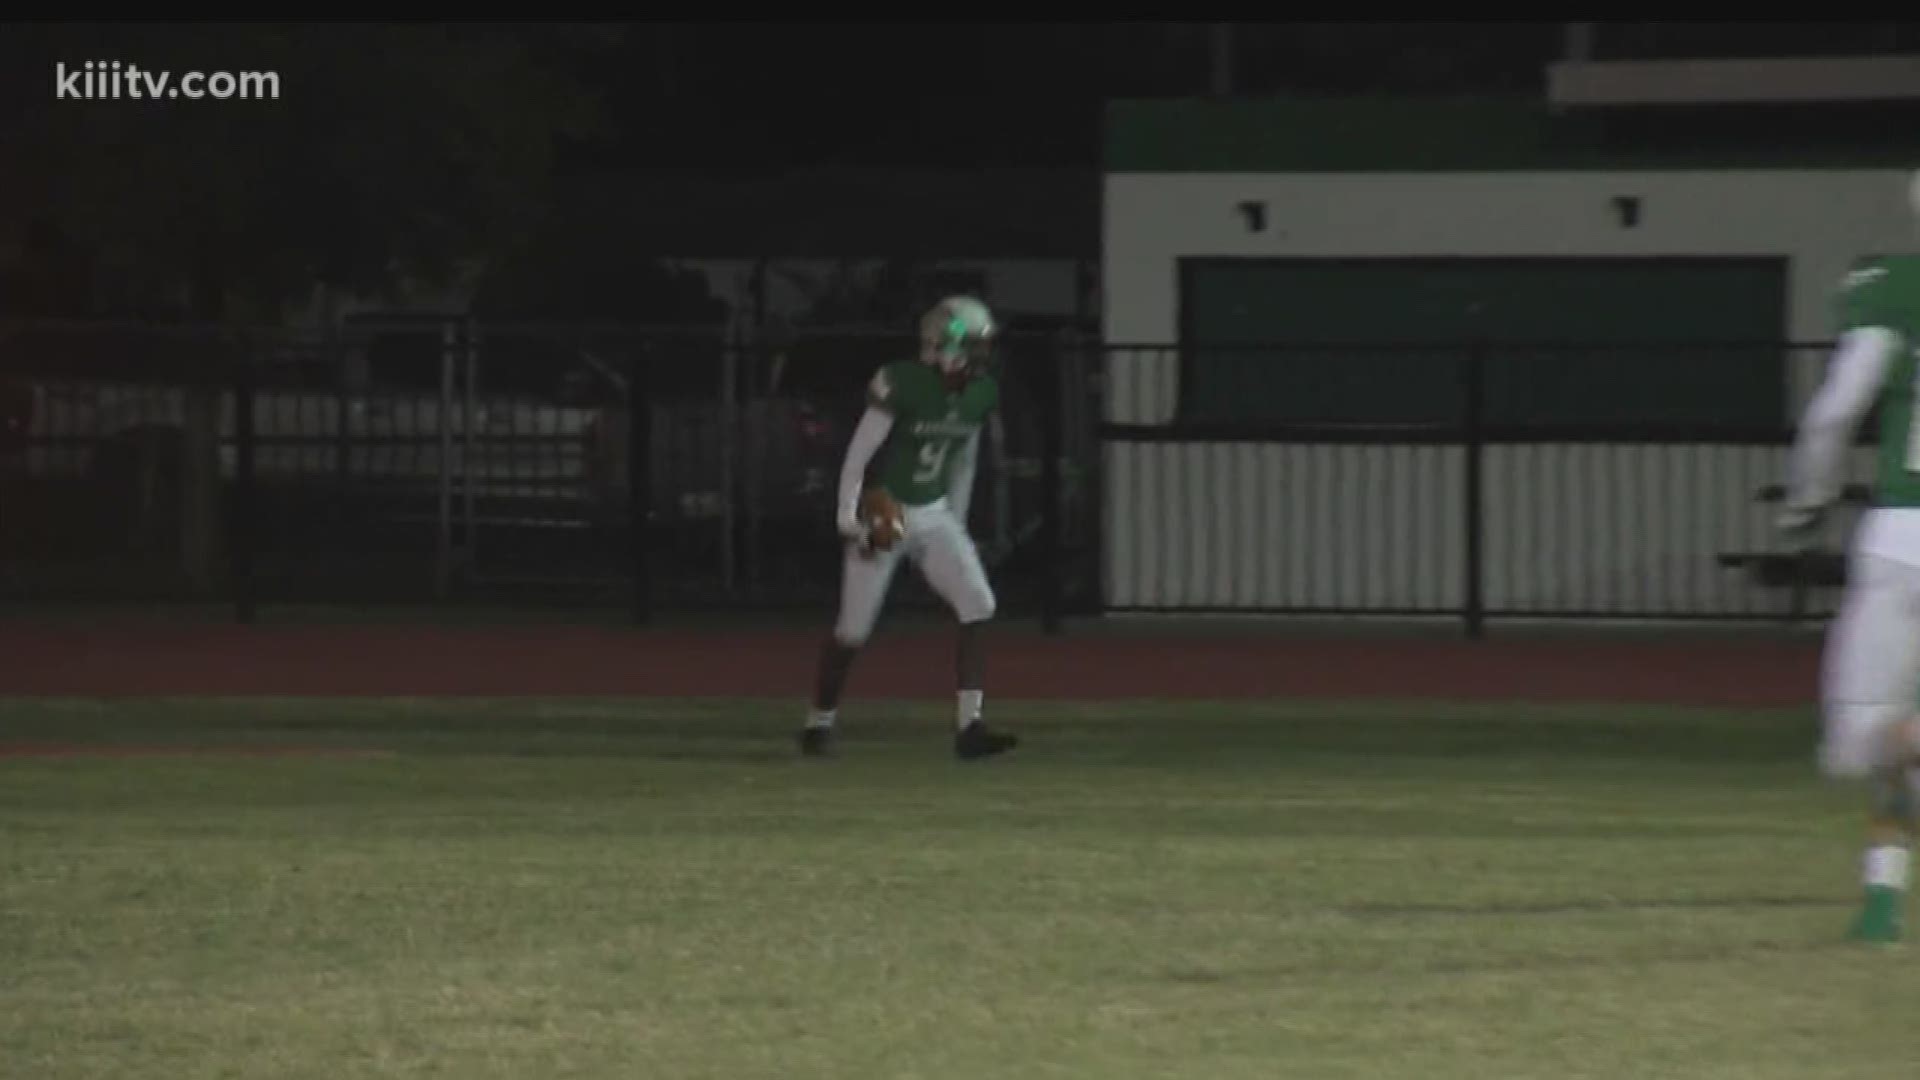 Week 10 of the Blitz Part IV includes:- Woodsboro's Zion Anderson with our Play of the Week- A look at what you can expect on Week 11 of the Blitz